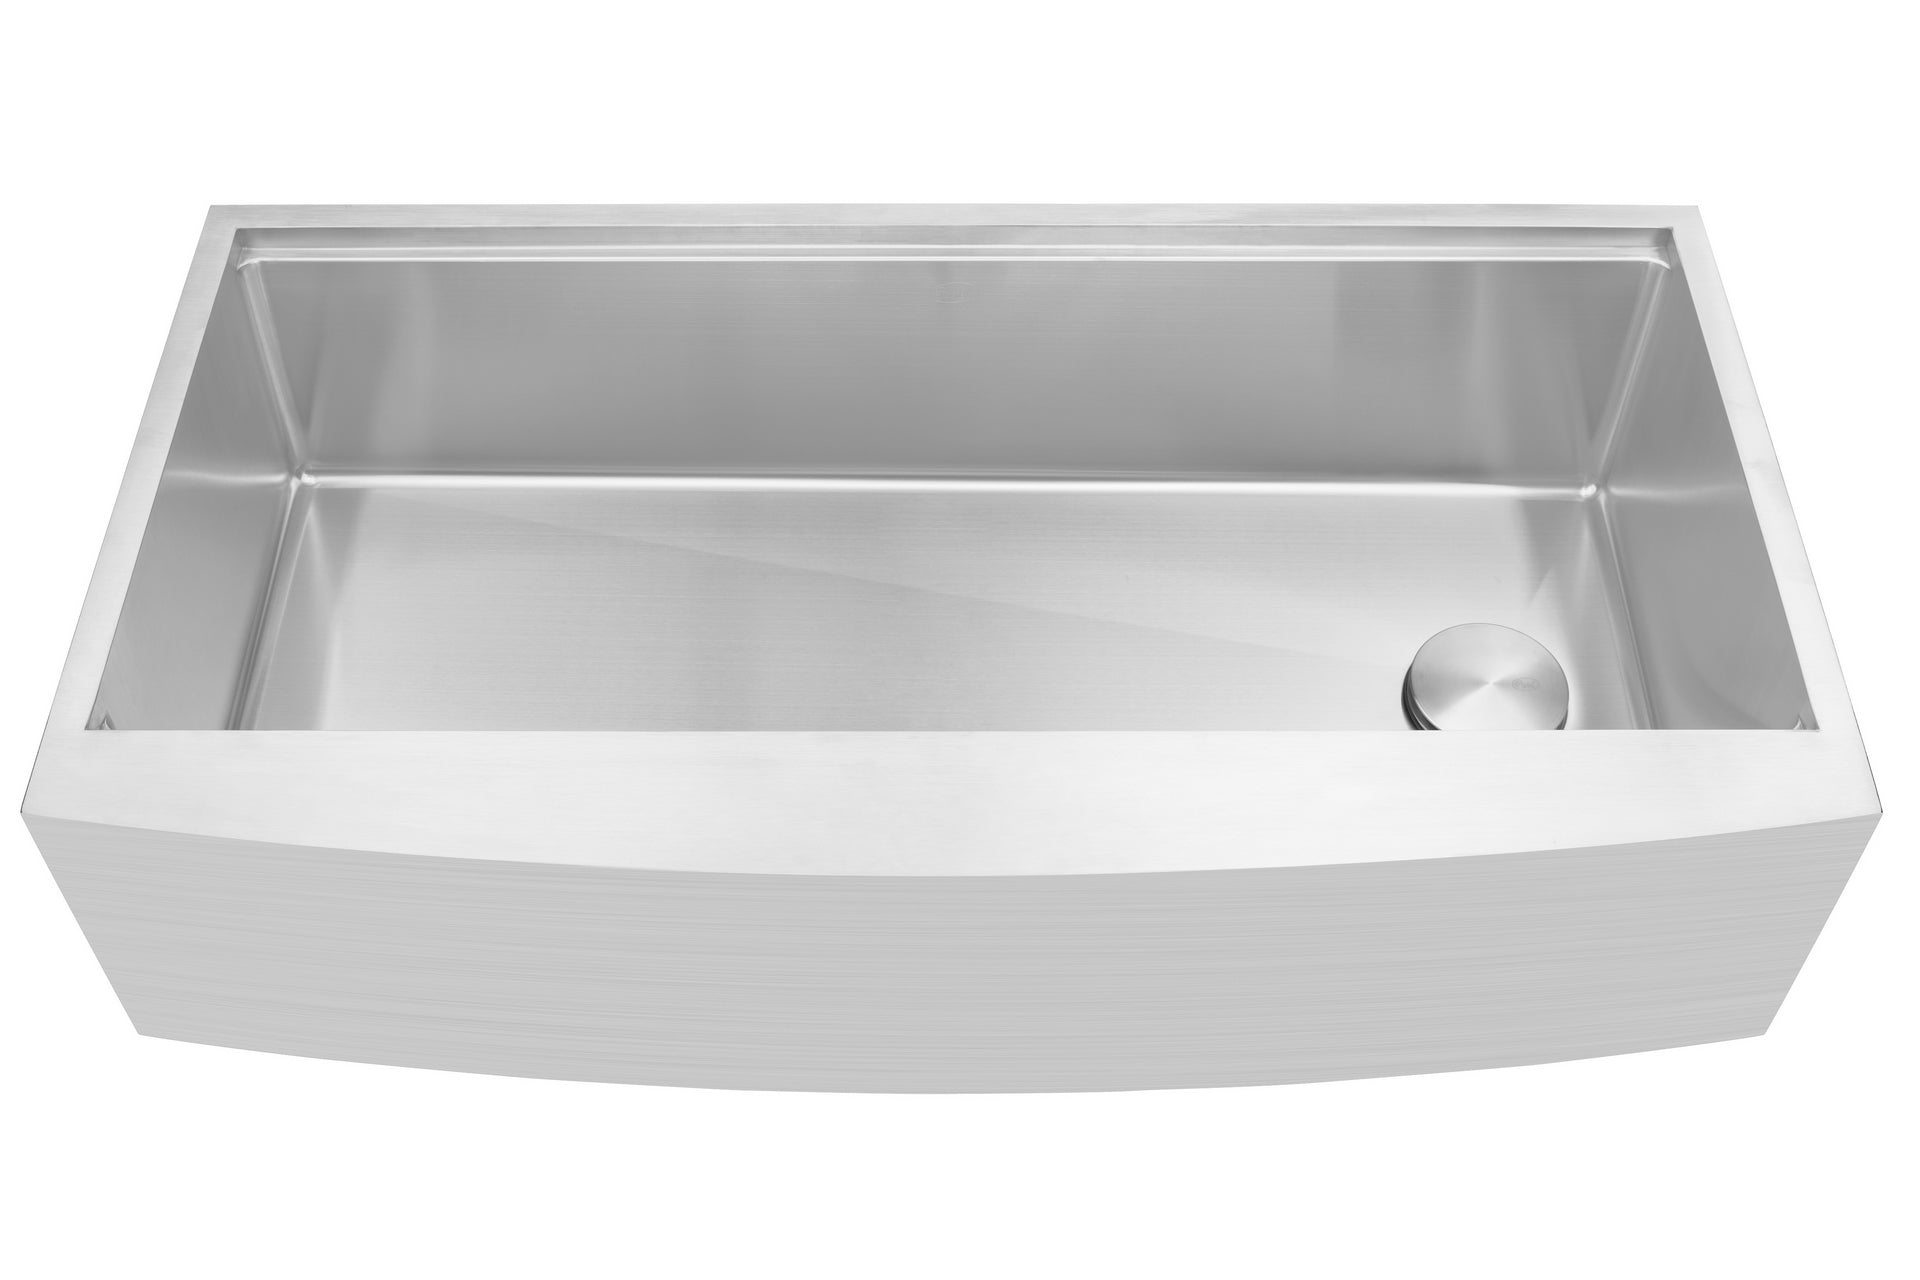 Workstation Farmhouse Apron Curve Front 16 Gauge  Stainless Steel Single Bowl Kitchen Sink w/ Integrated Ledge, 15mm Tight Radius w/ Premium Accessories